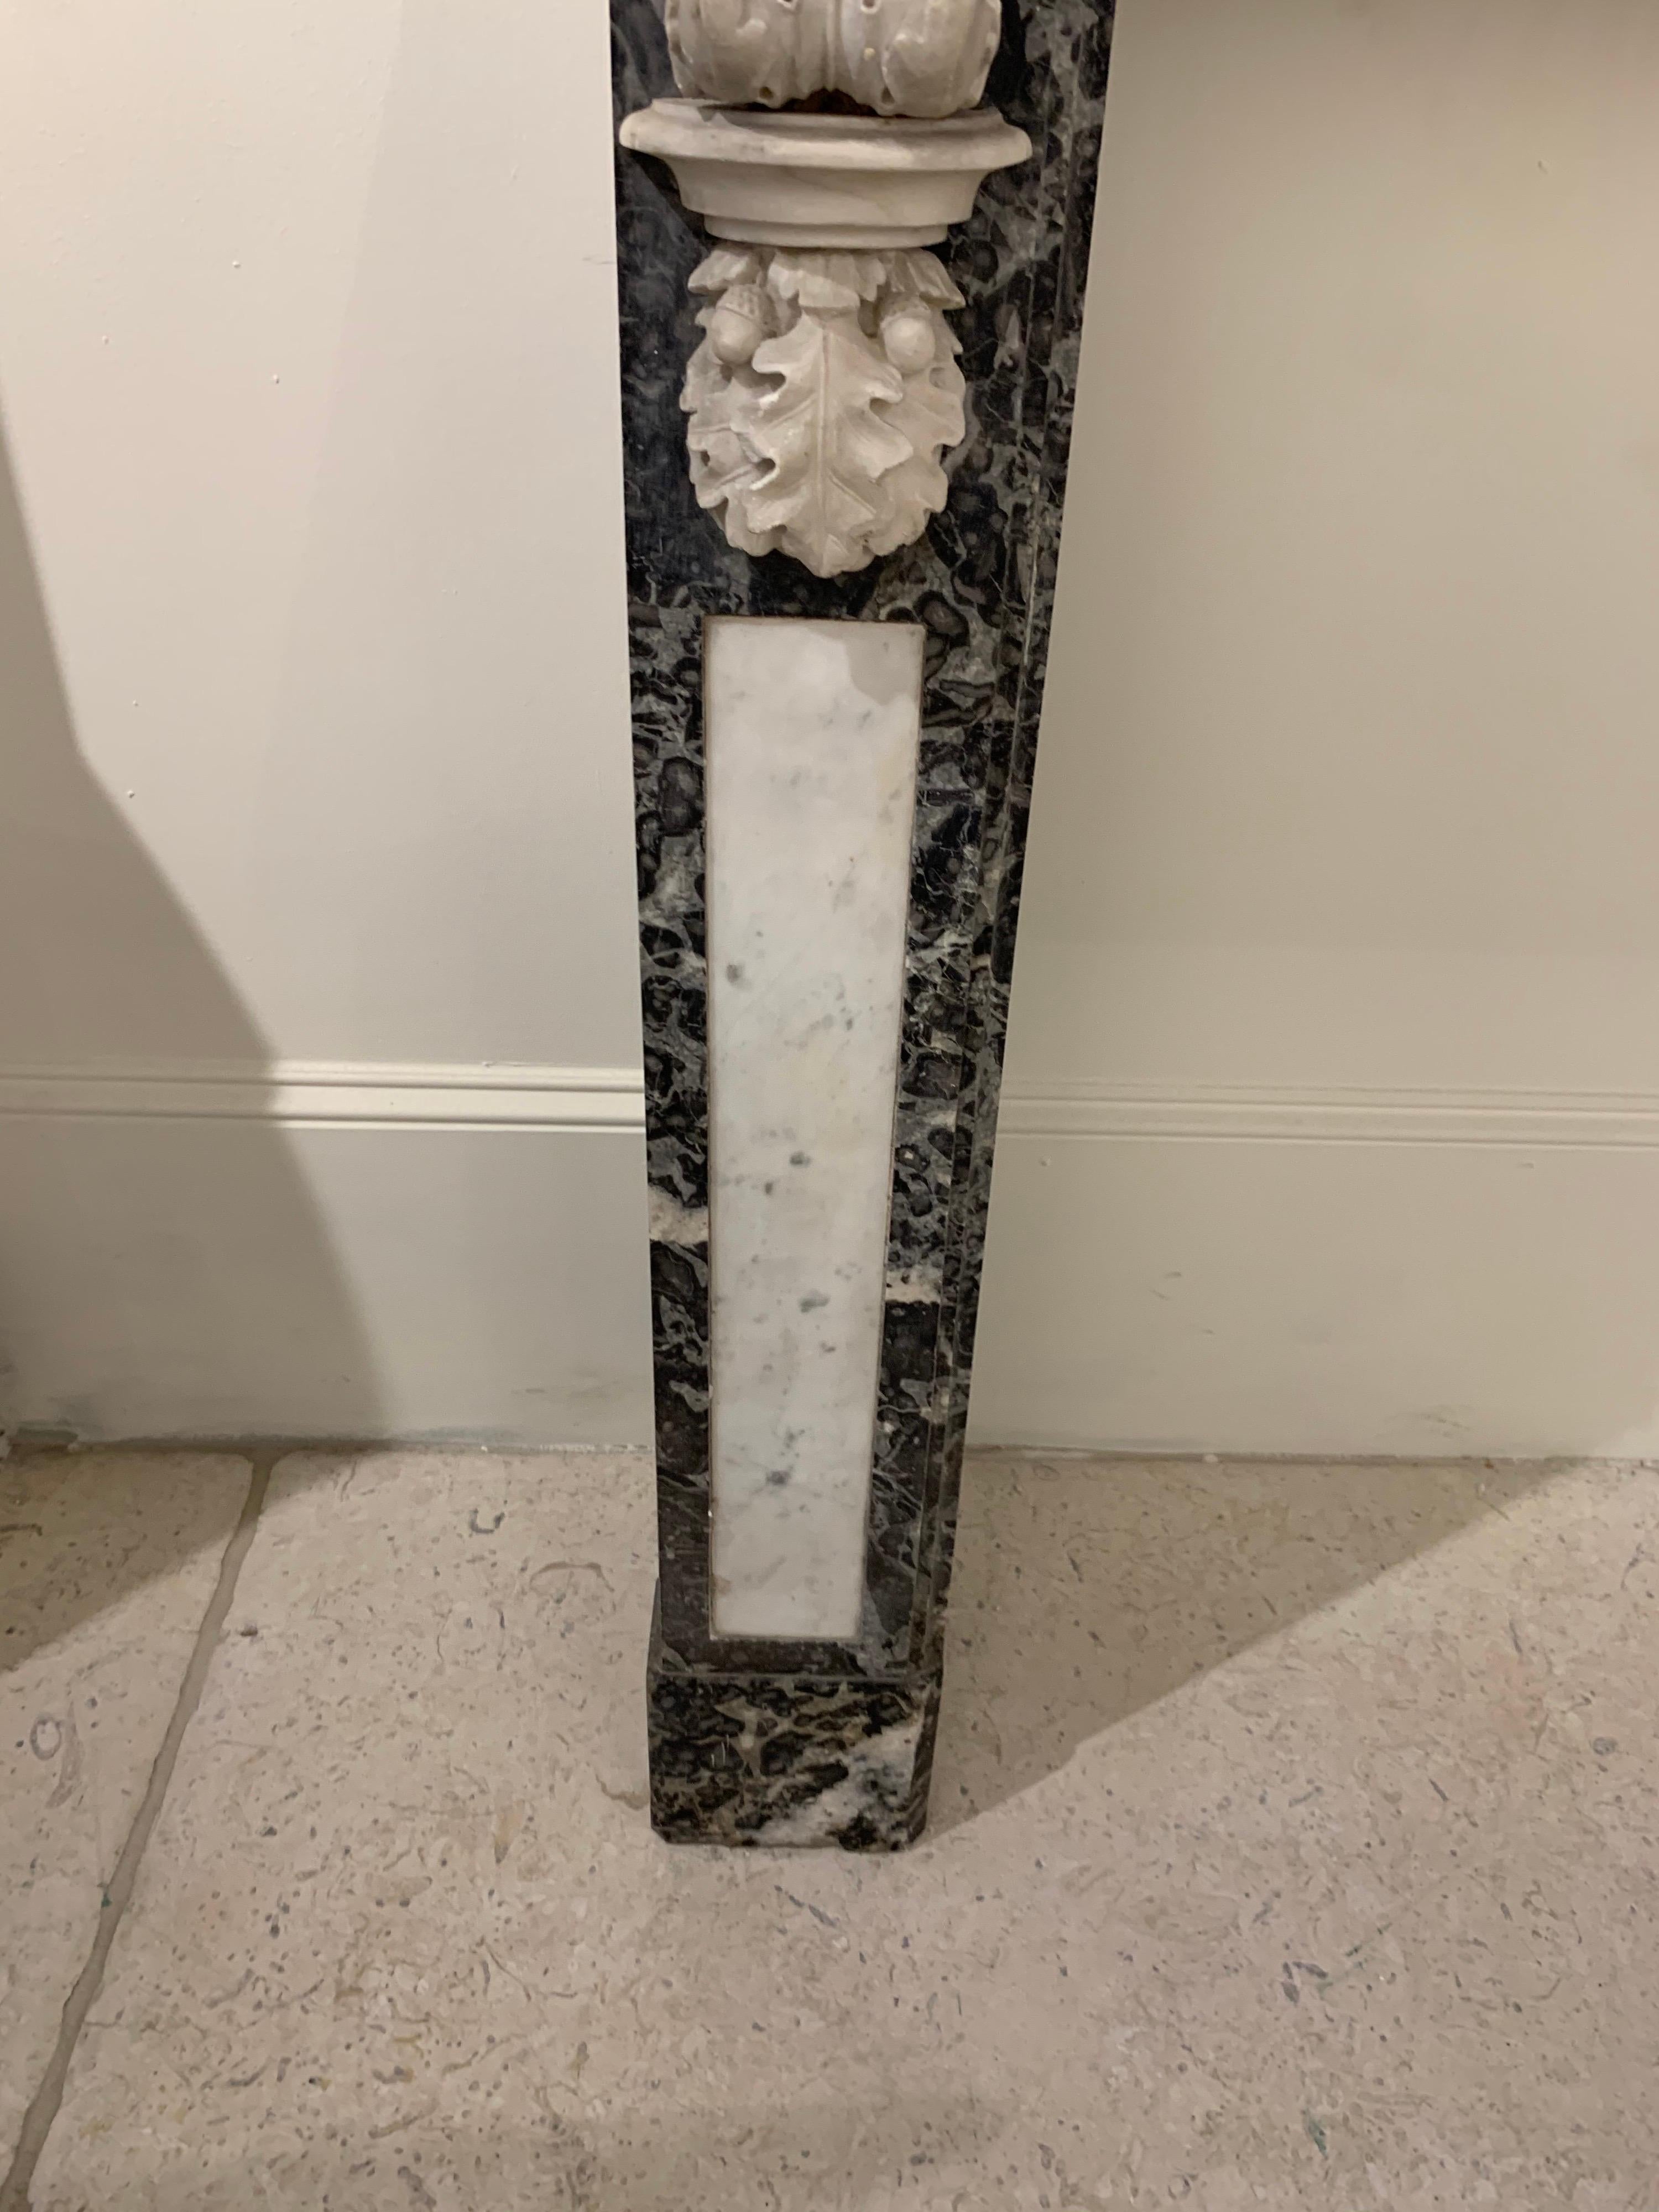 Fabulous 19th century French Napoleon III marble and gilt bronze fire place mantel. Beautiful grey and white marble along with lovely carvings. Extra special!